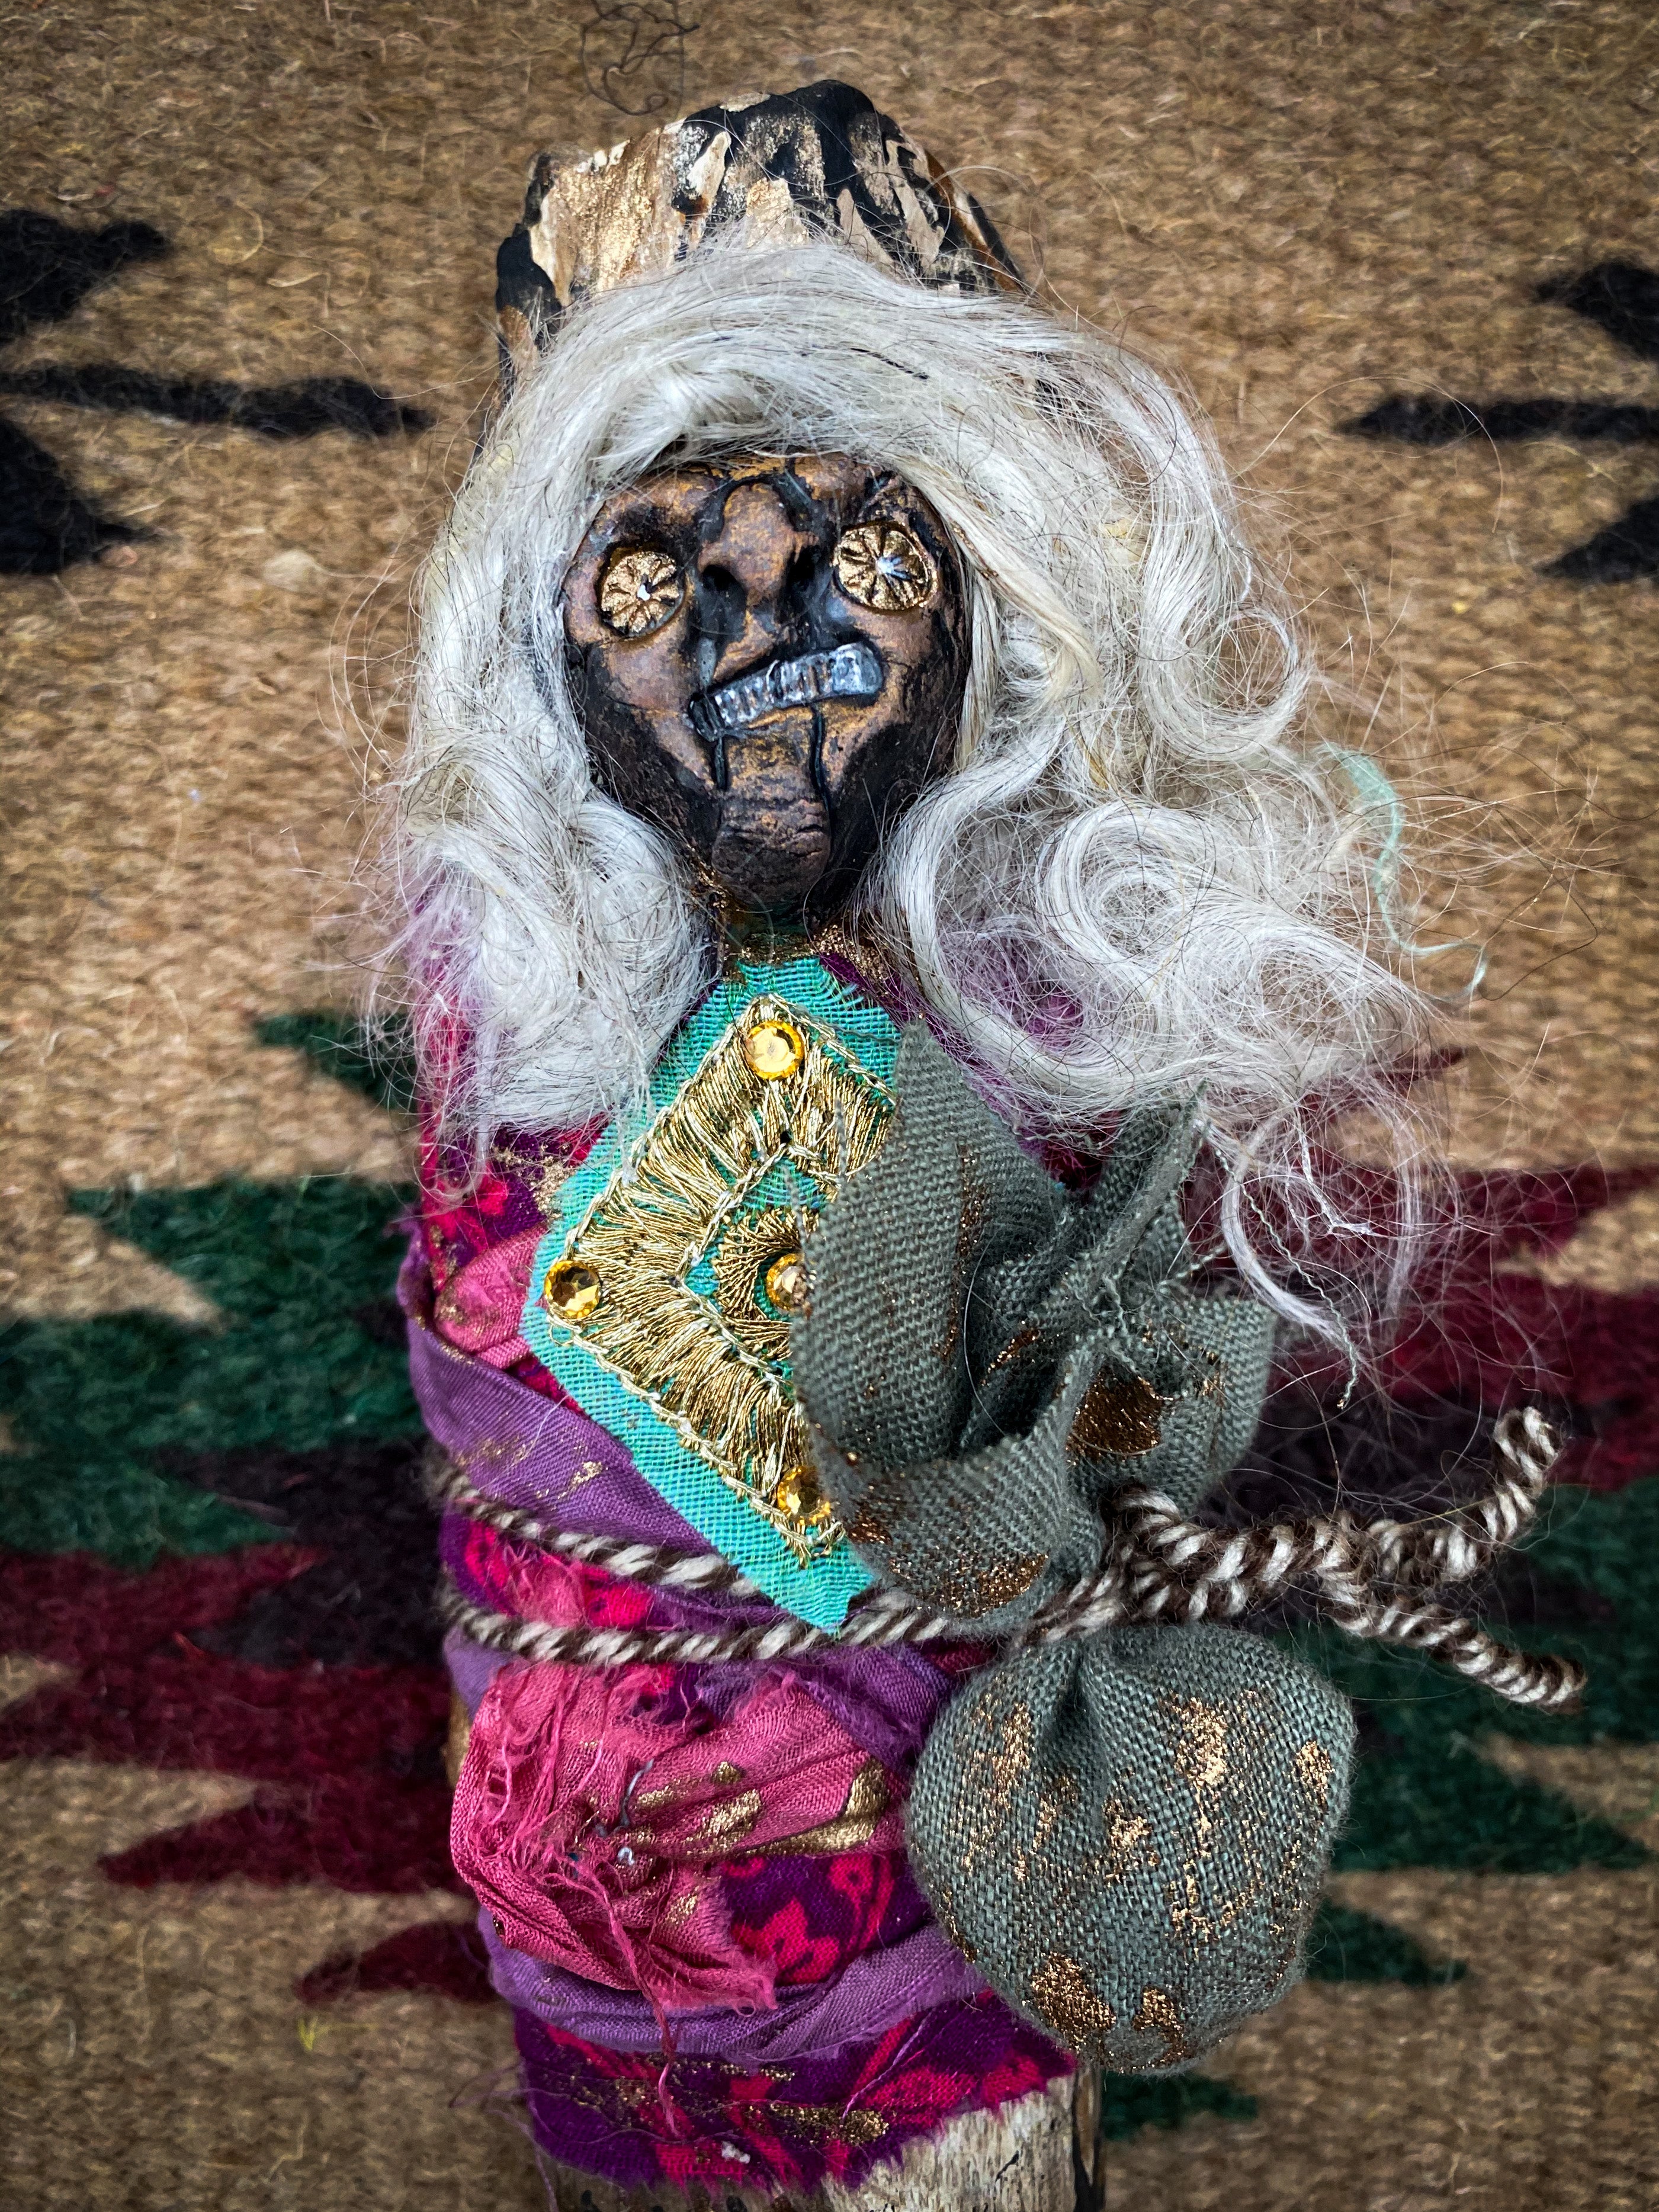 Conjure Doll for Courage and Creativity - Spirit Doll - Medicine Doll - JuJu Doll - Women of the World Series